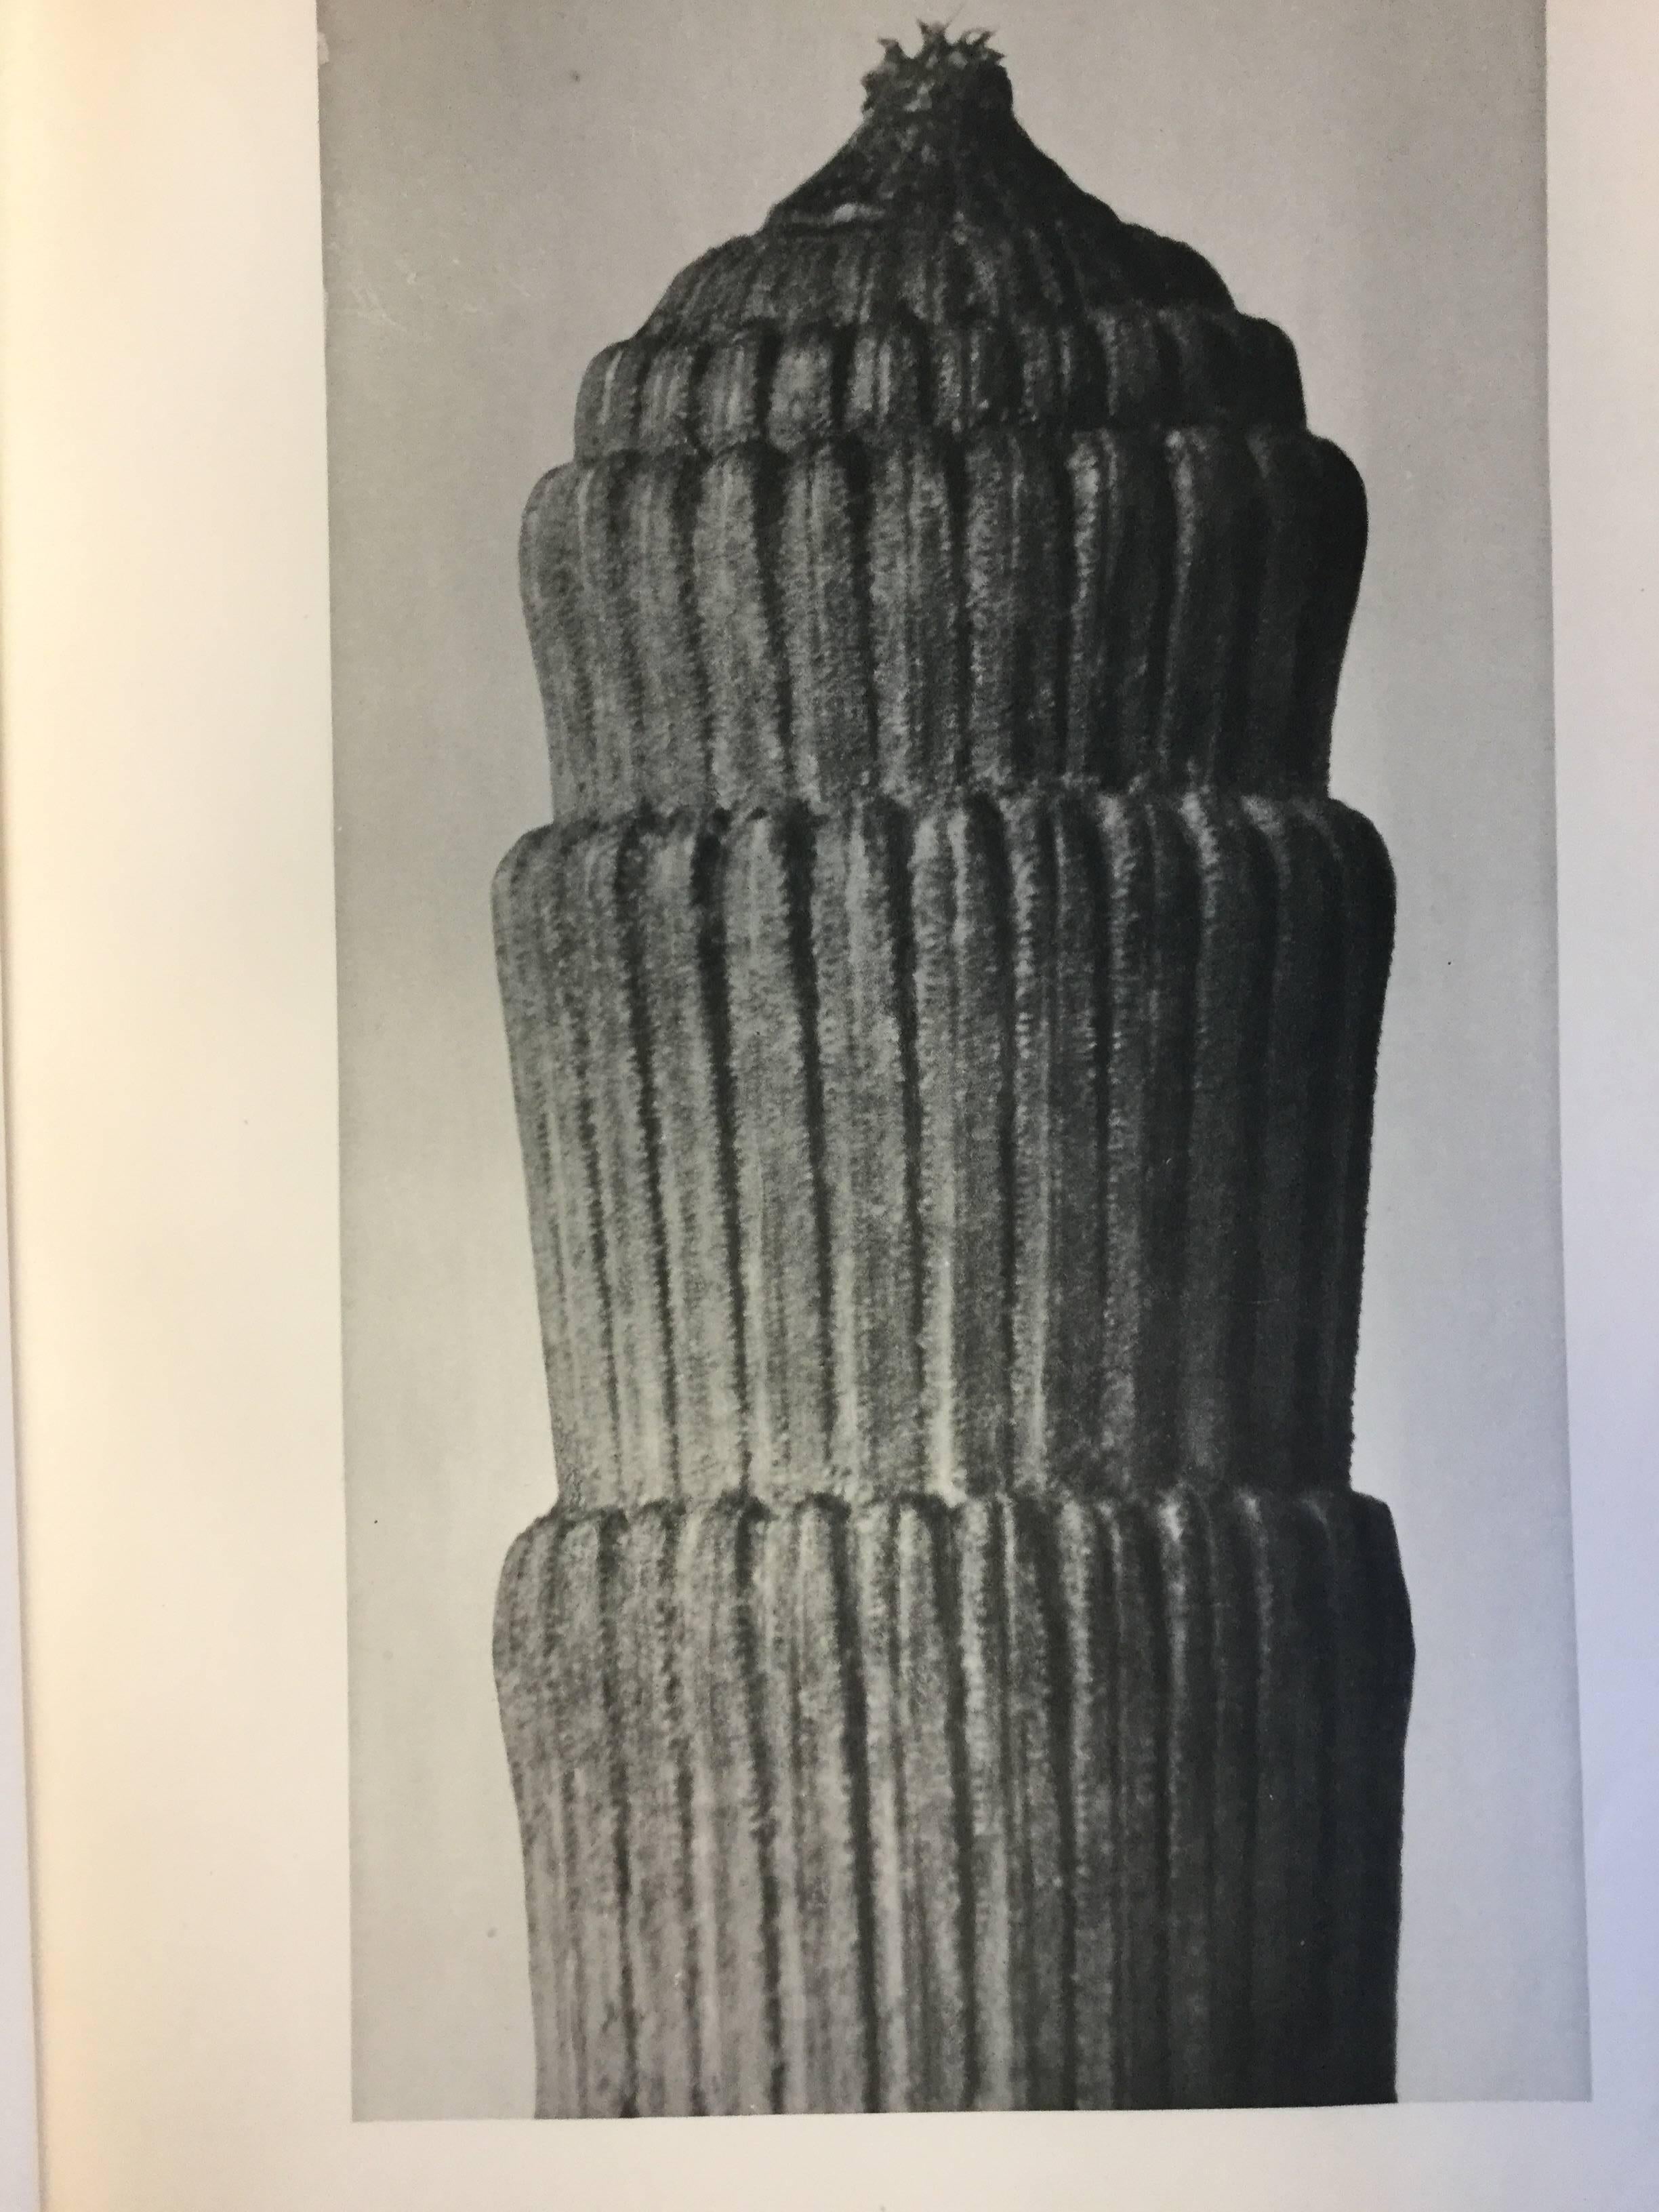 First Edition Karl Blossfeldt Photogravure 1928. The first printing has the best resolution and will retain its value in a collection.